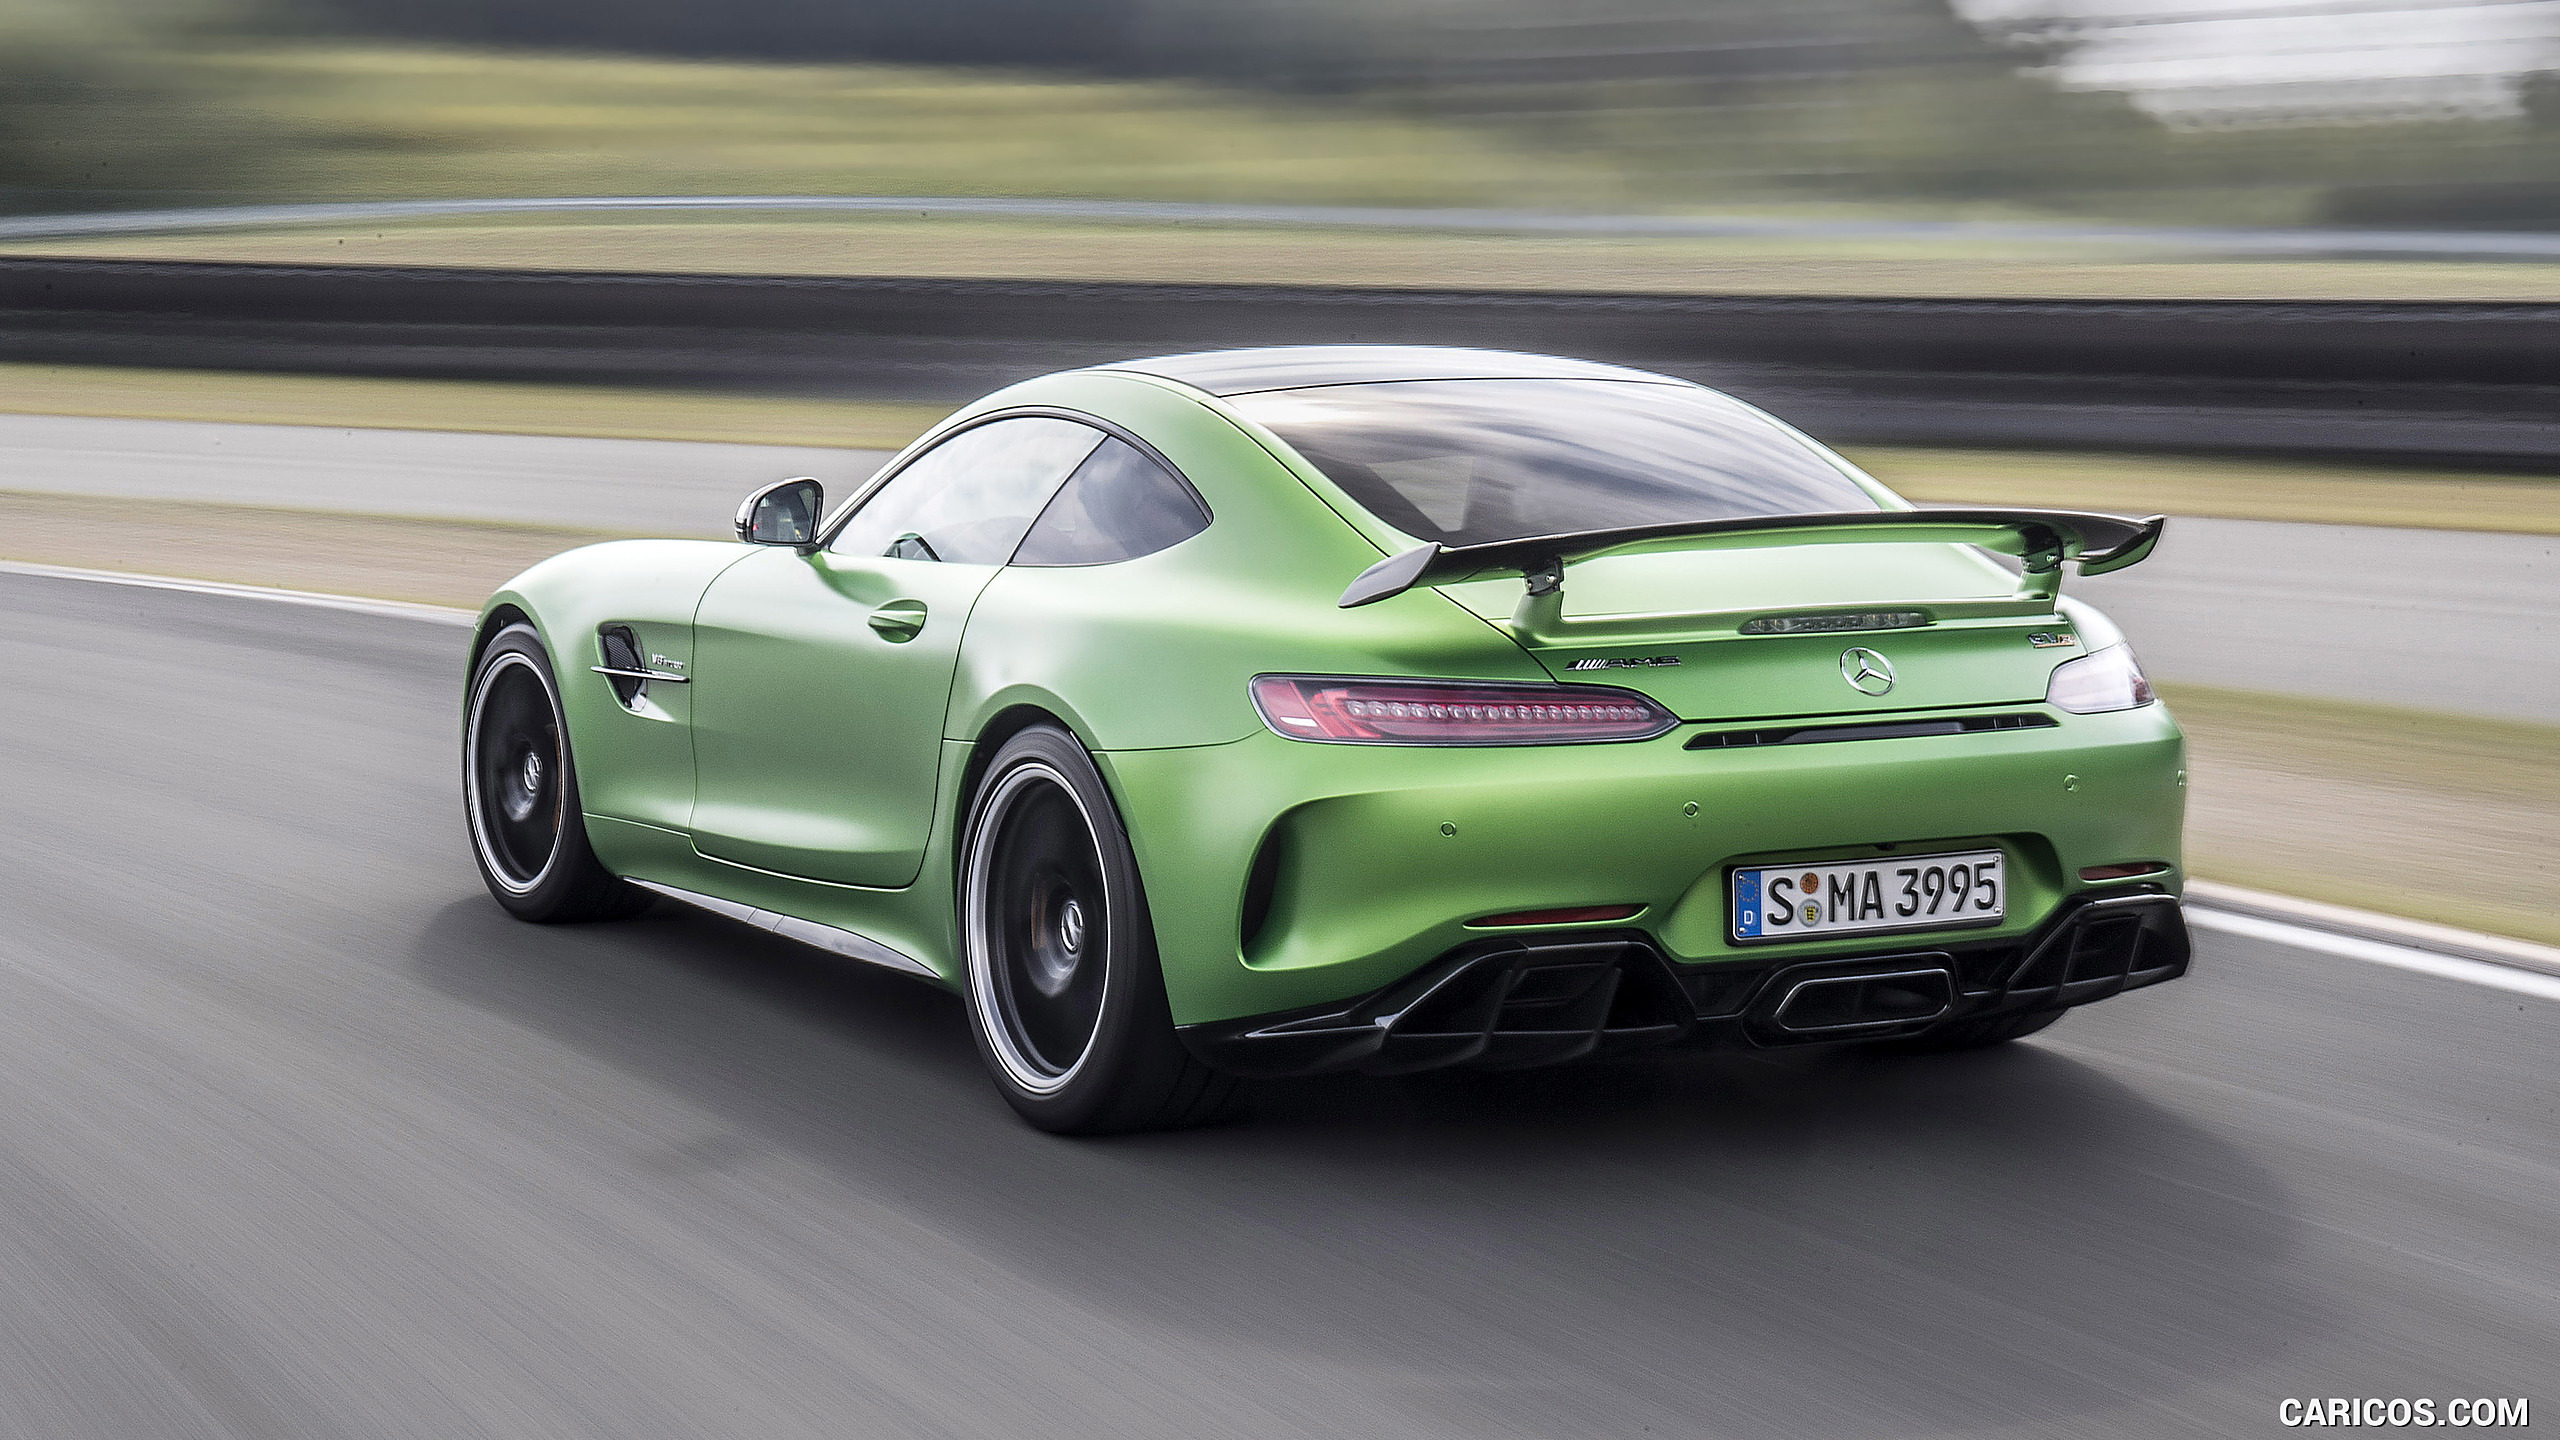 2017 Mercedes-AMG GT R Coupe - Rear, #158 of 182